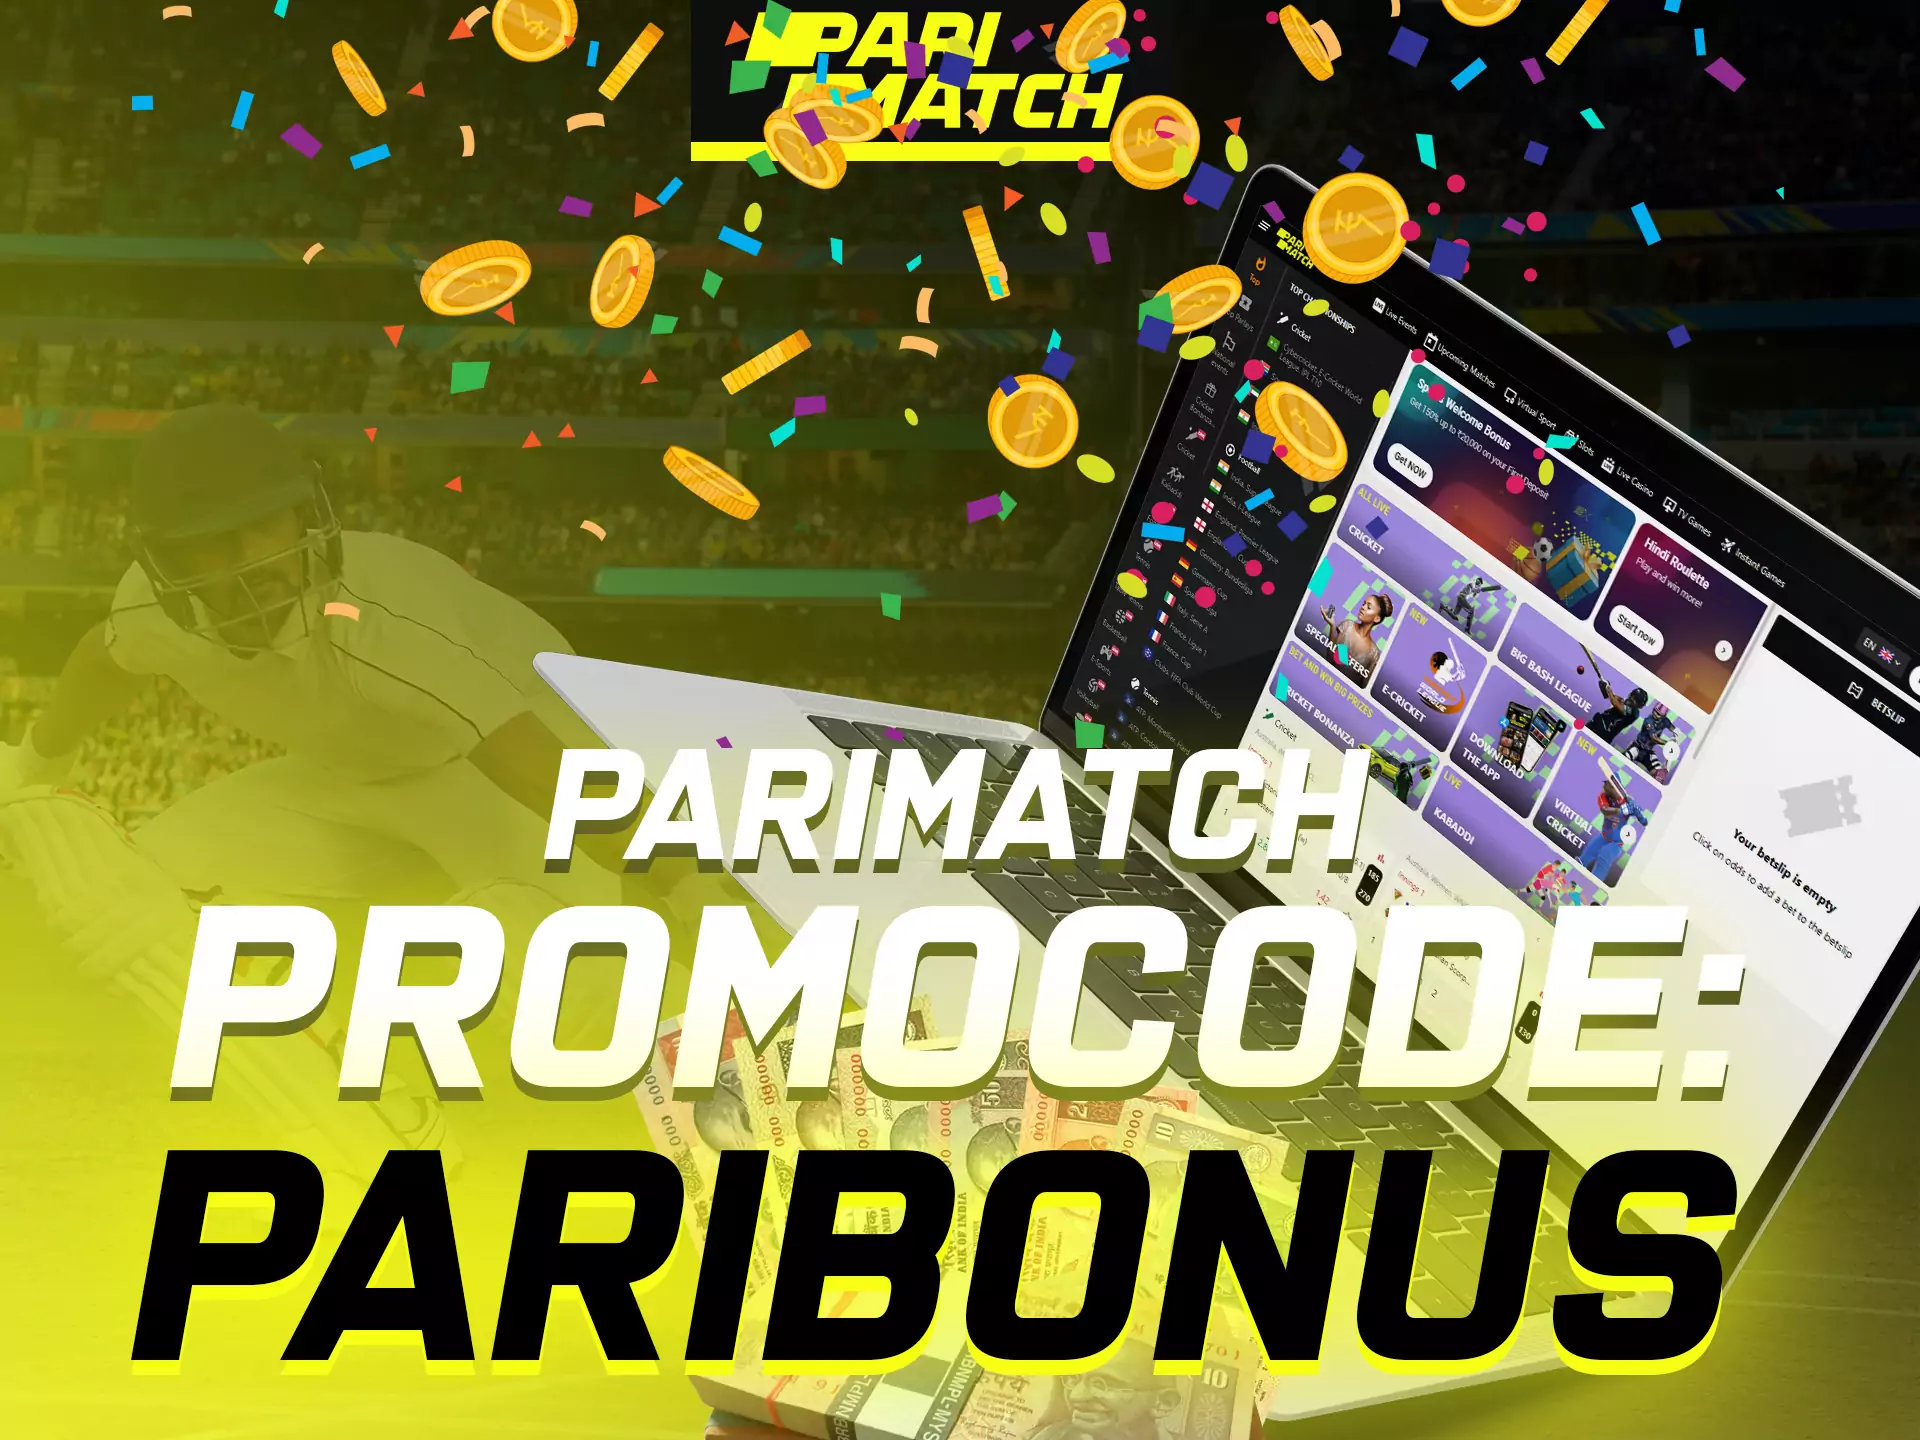 Get your welcome bonus by inserting special Parimatch promocode.